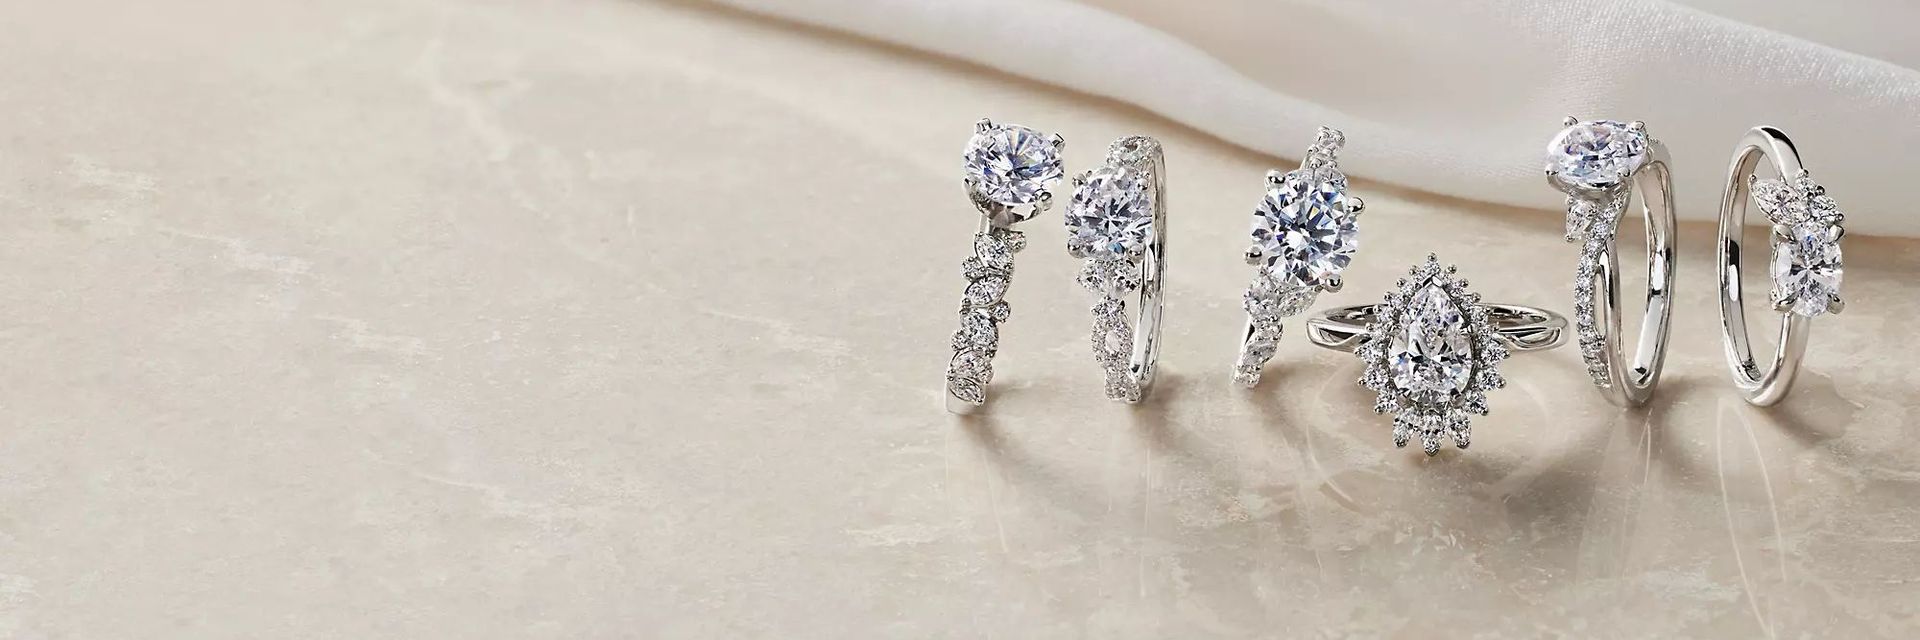 Buy Diamond Engagement Ring Designs Online For Women with Price